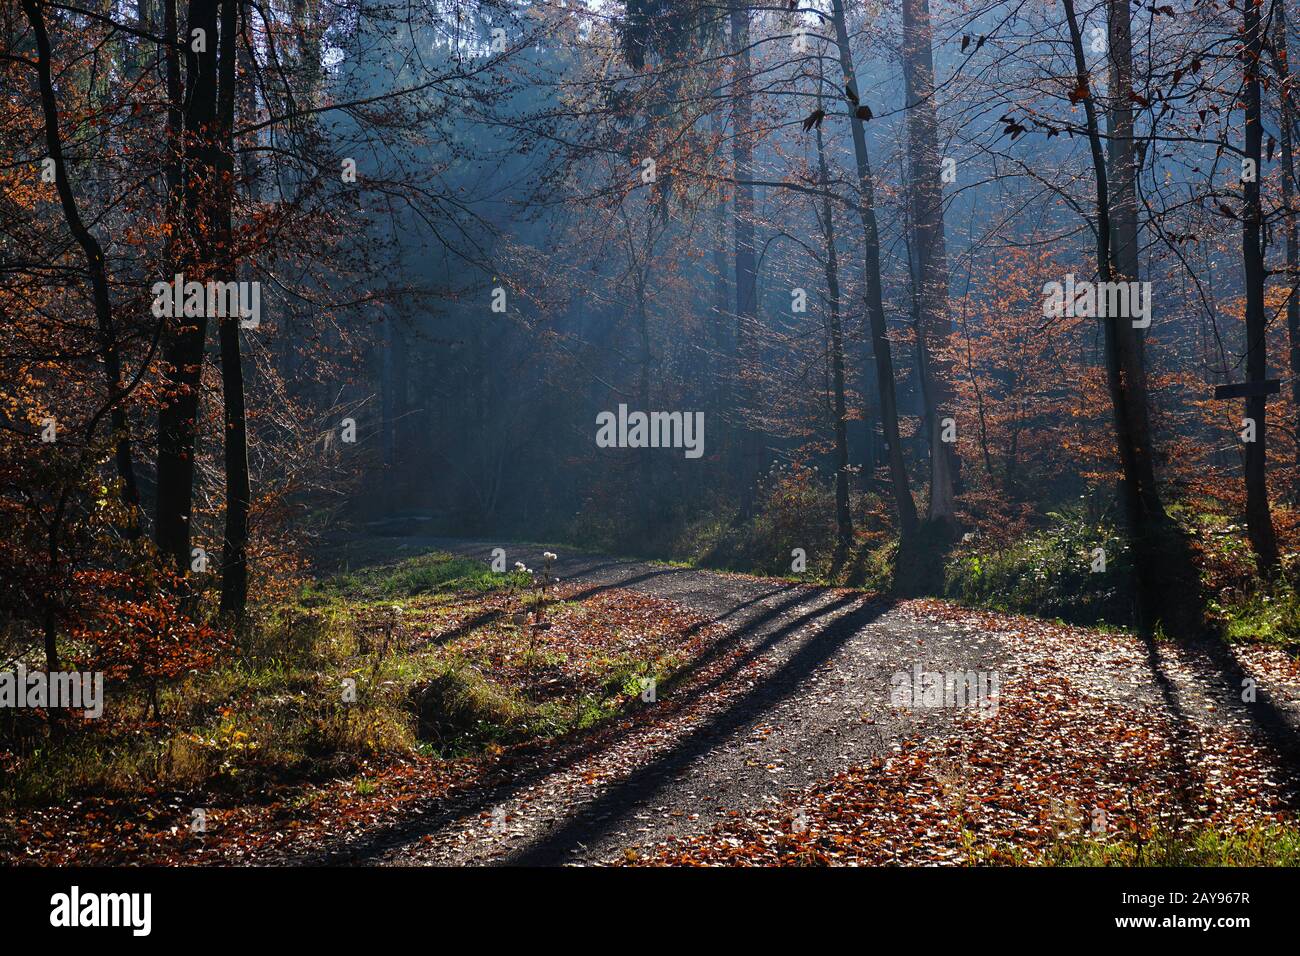 Lighting mood in the autumn forest, Stock Photo